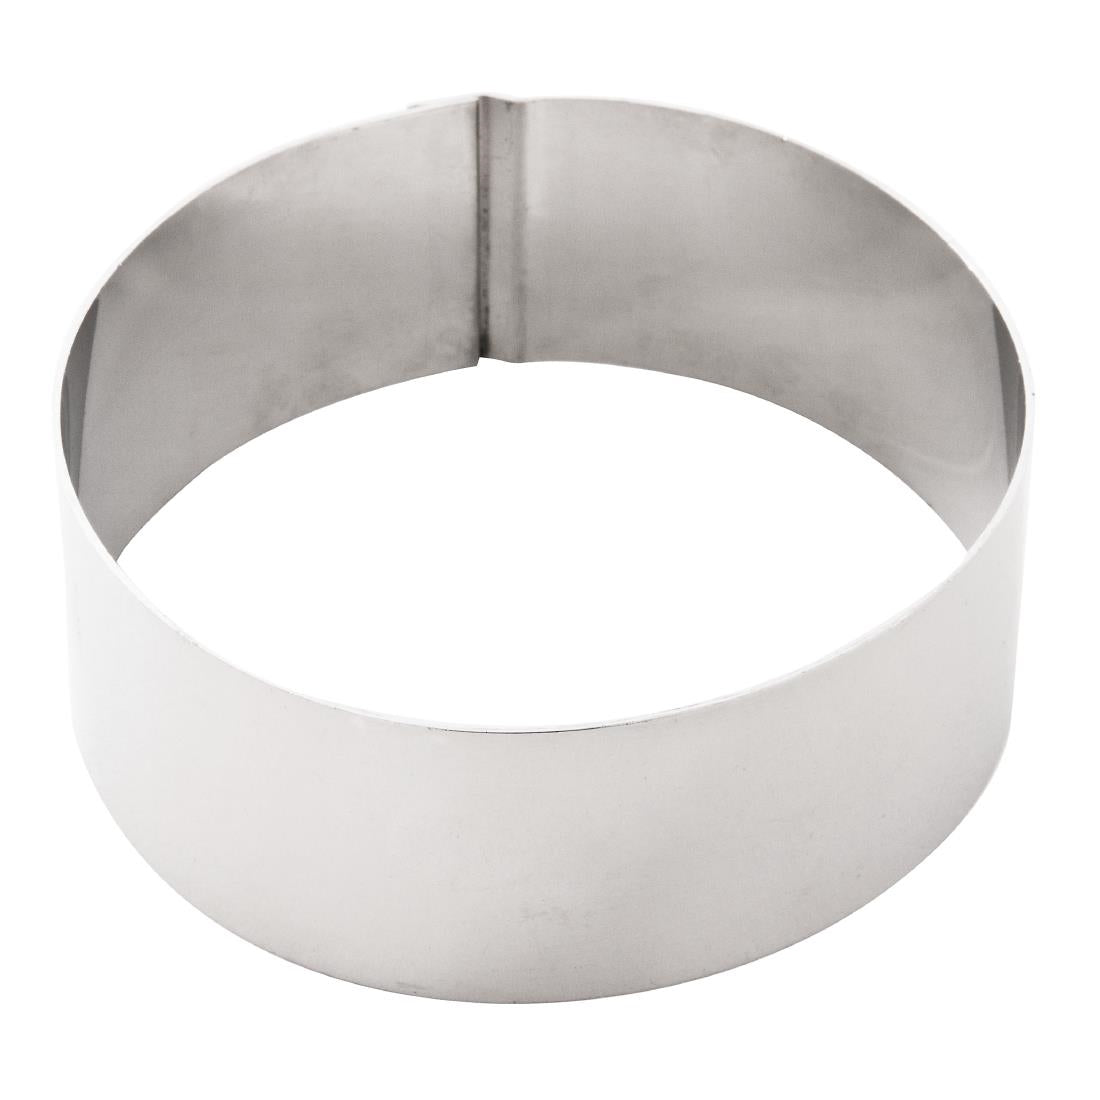 CC057 Vogue Mousse Ring 35 x 90mm JD Catering Equipment Solutions Ltd